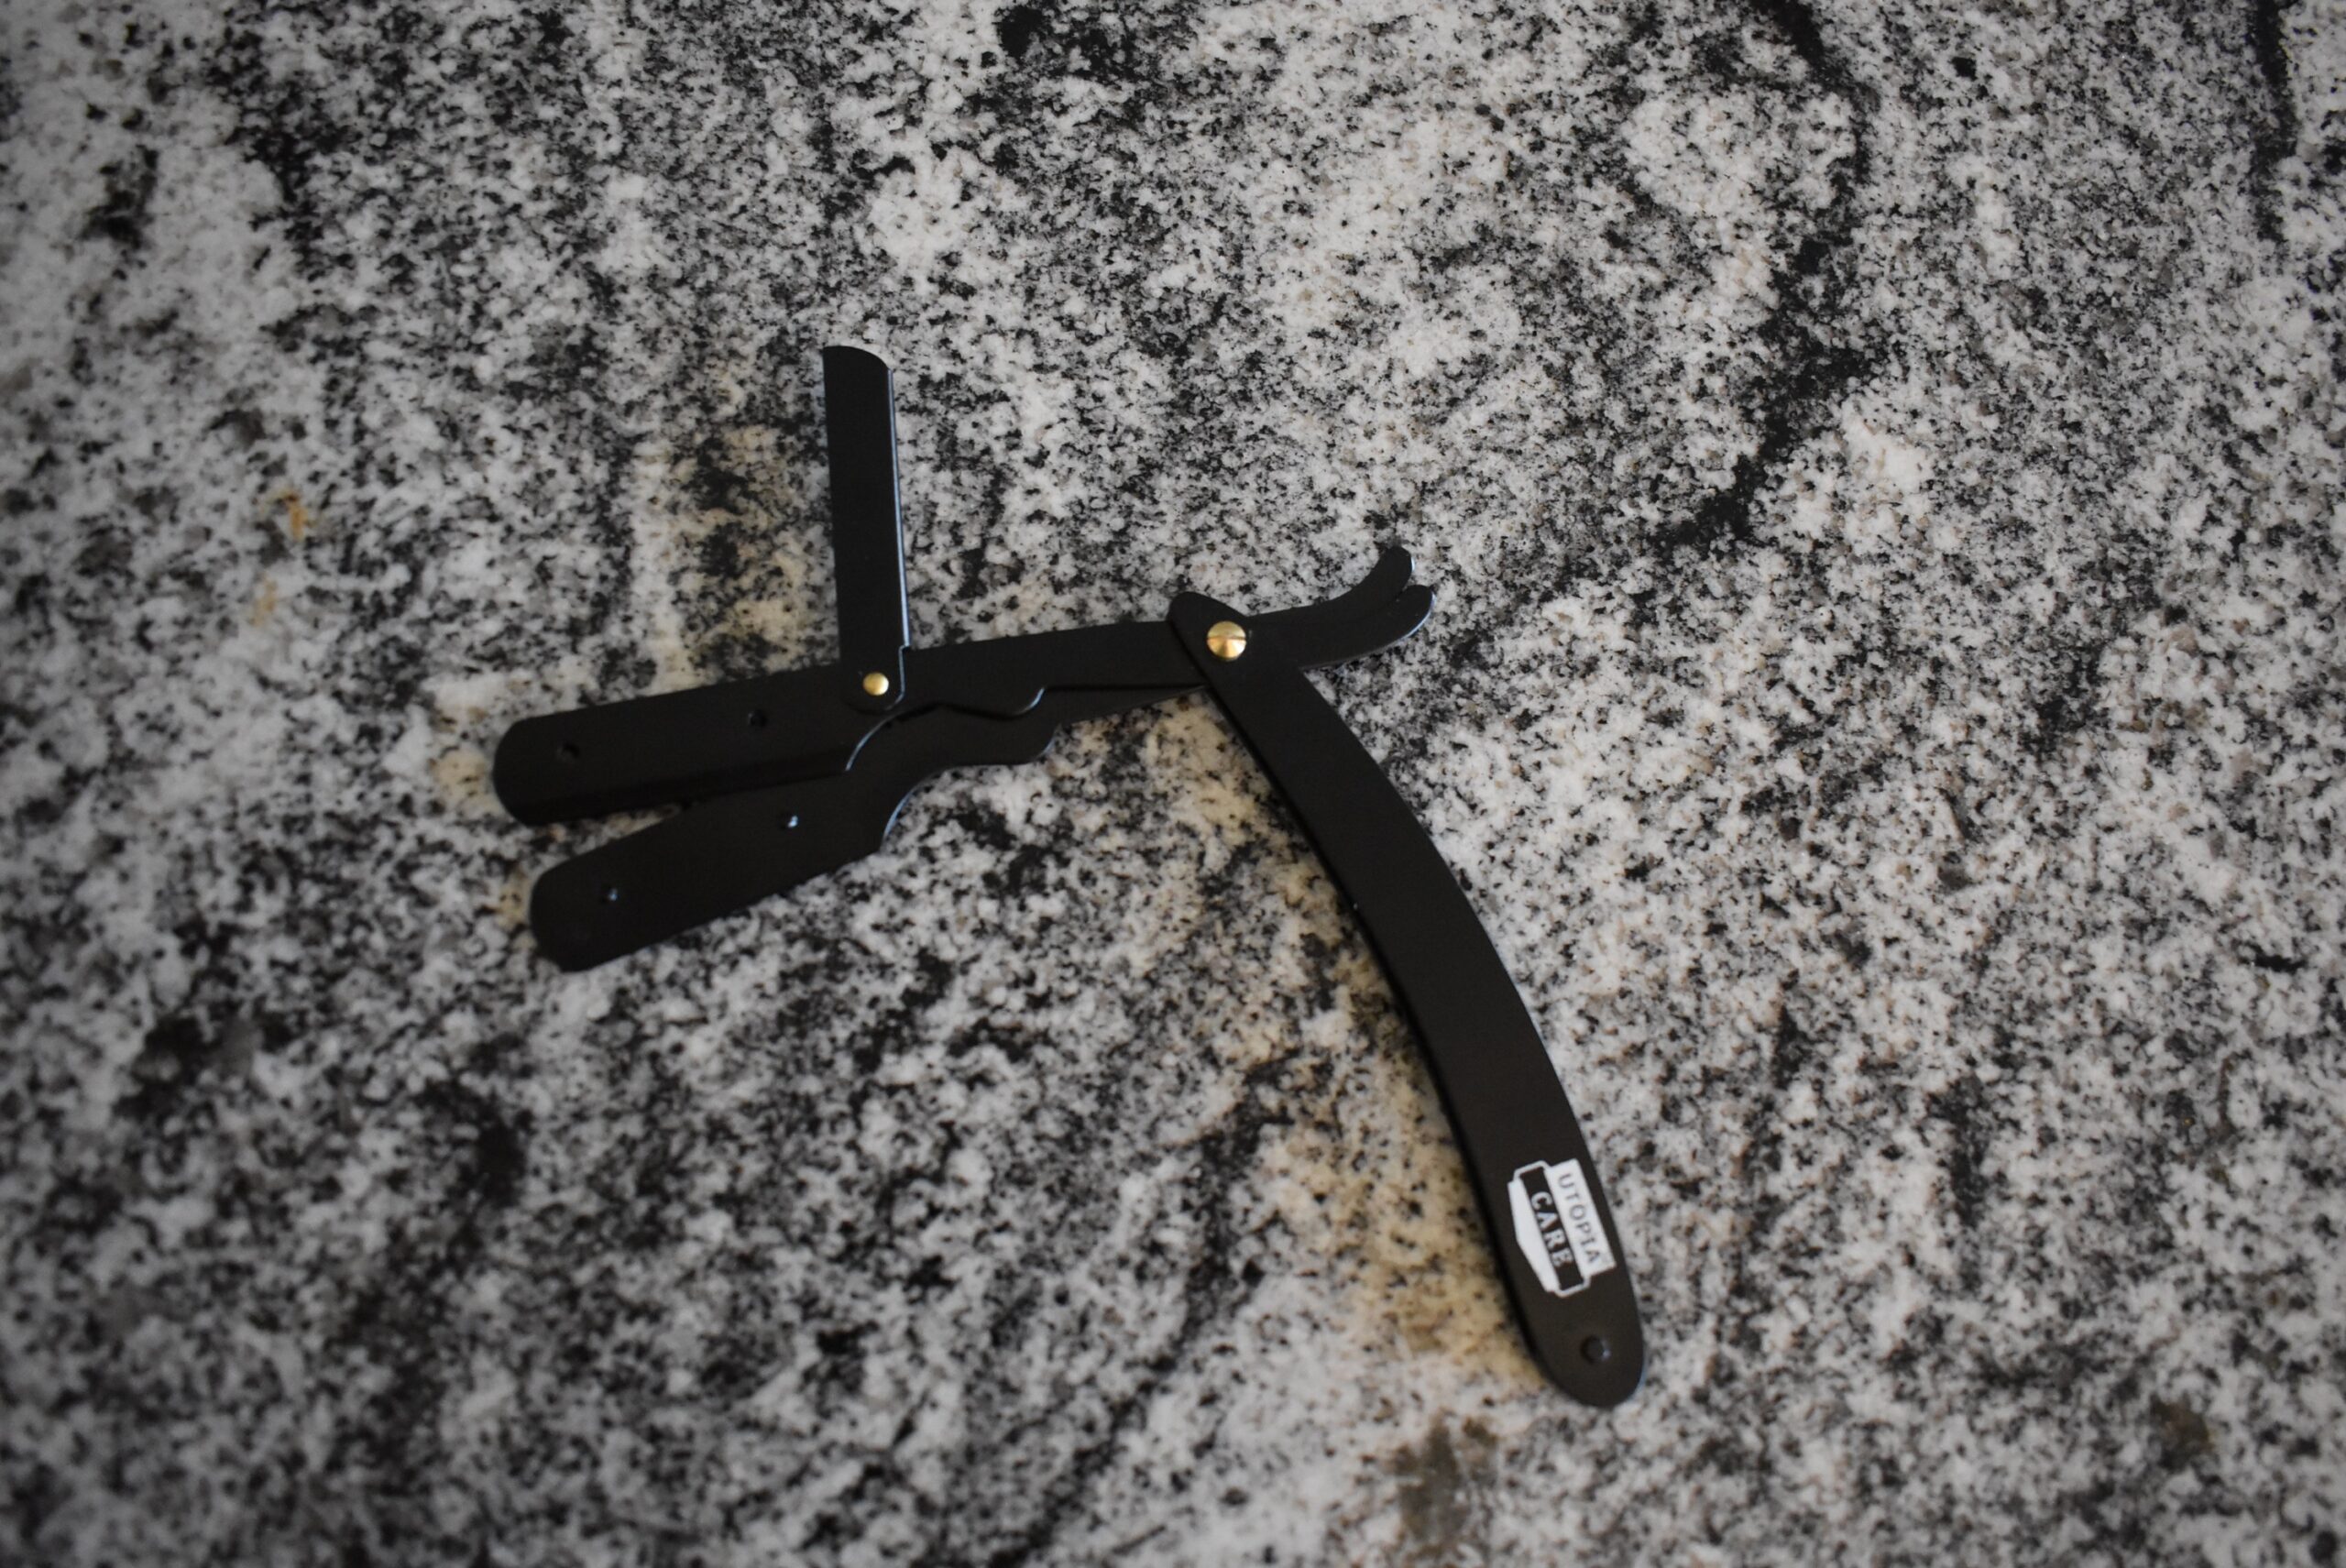 The Utopia care straight razor slightly open to allow a blade to be changed